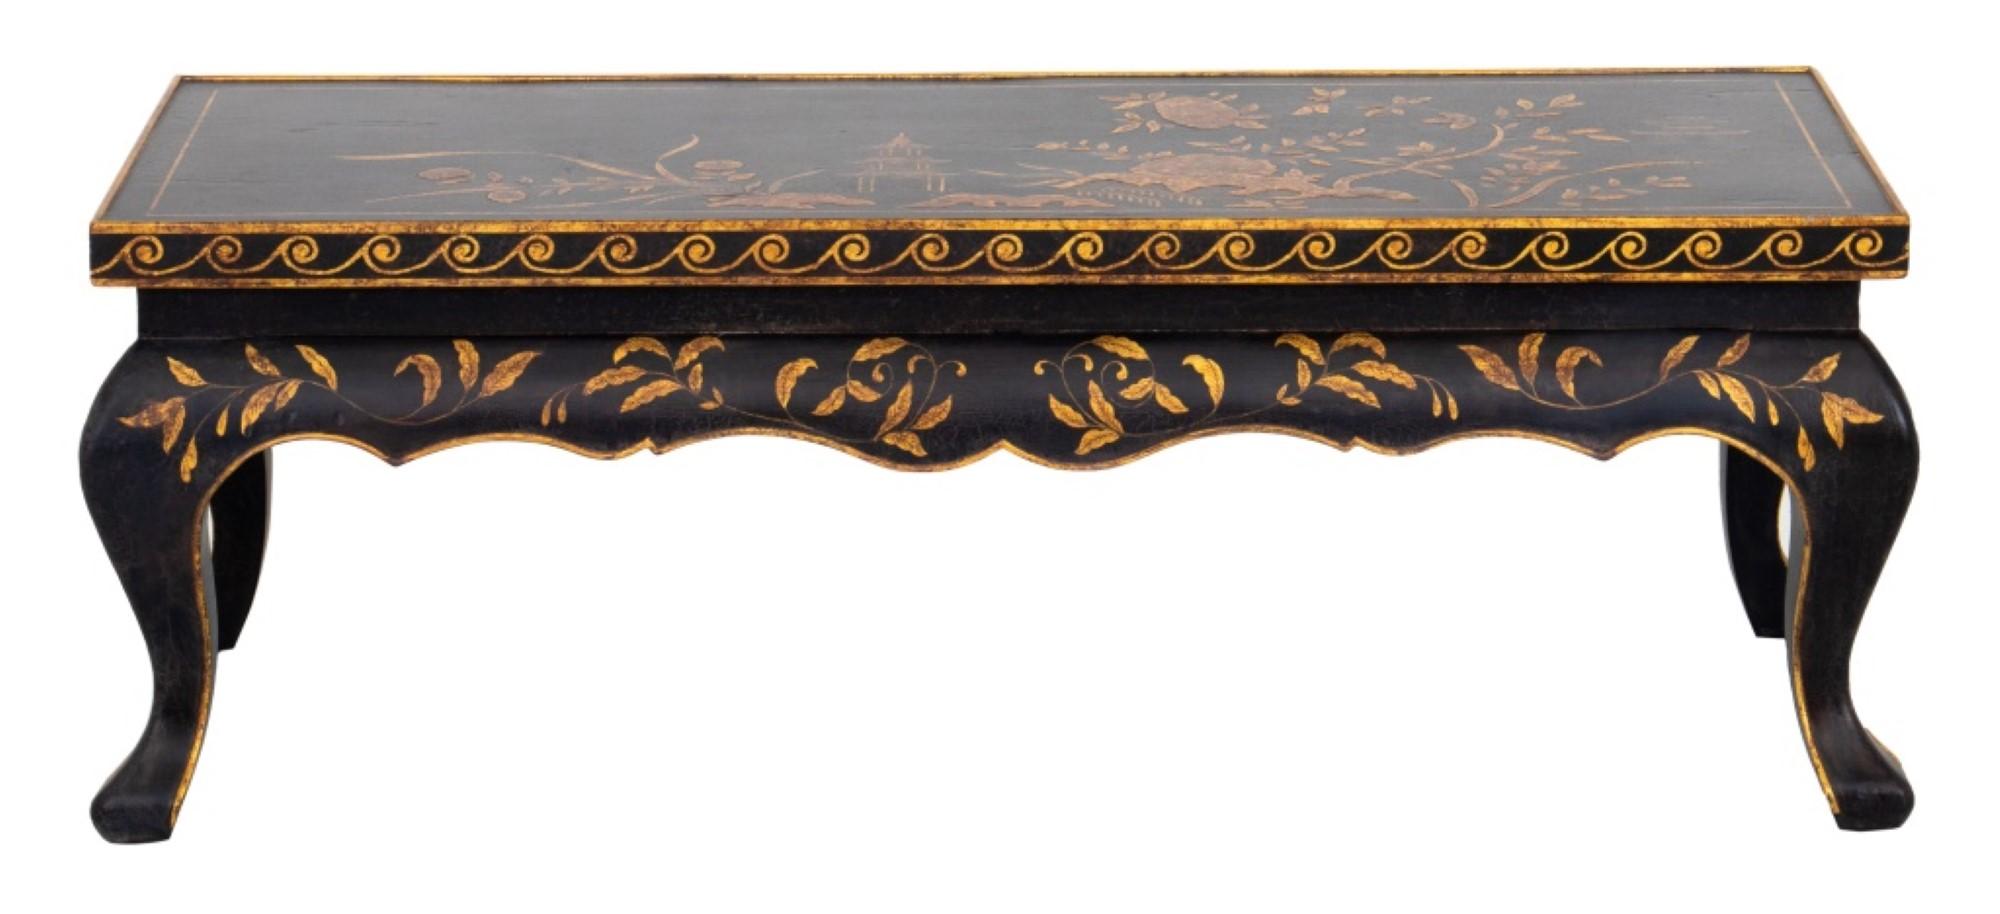 Chinese Ebonized & Gilt Wood Coffee Table For Sale 3